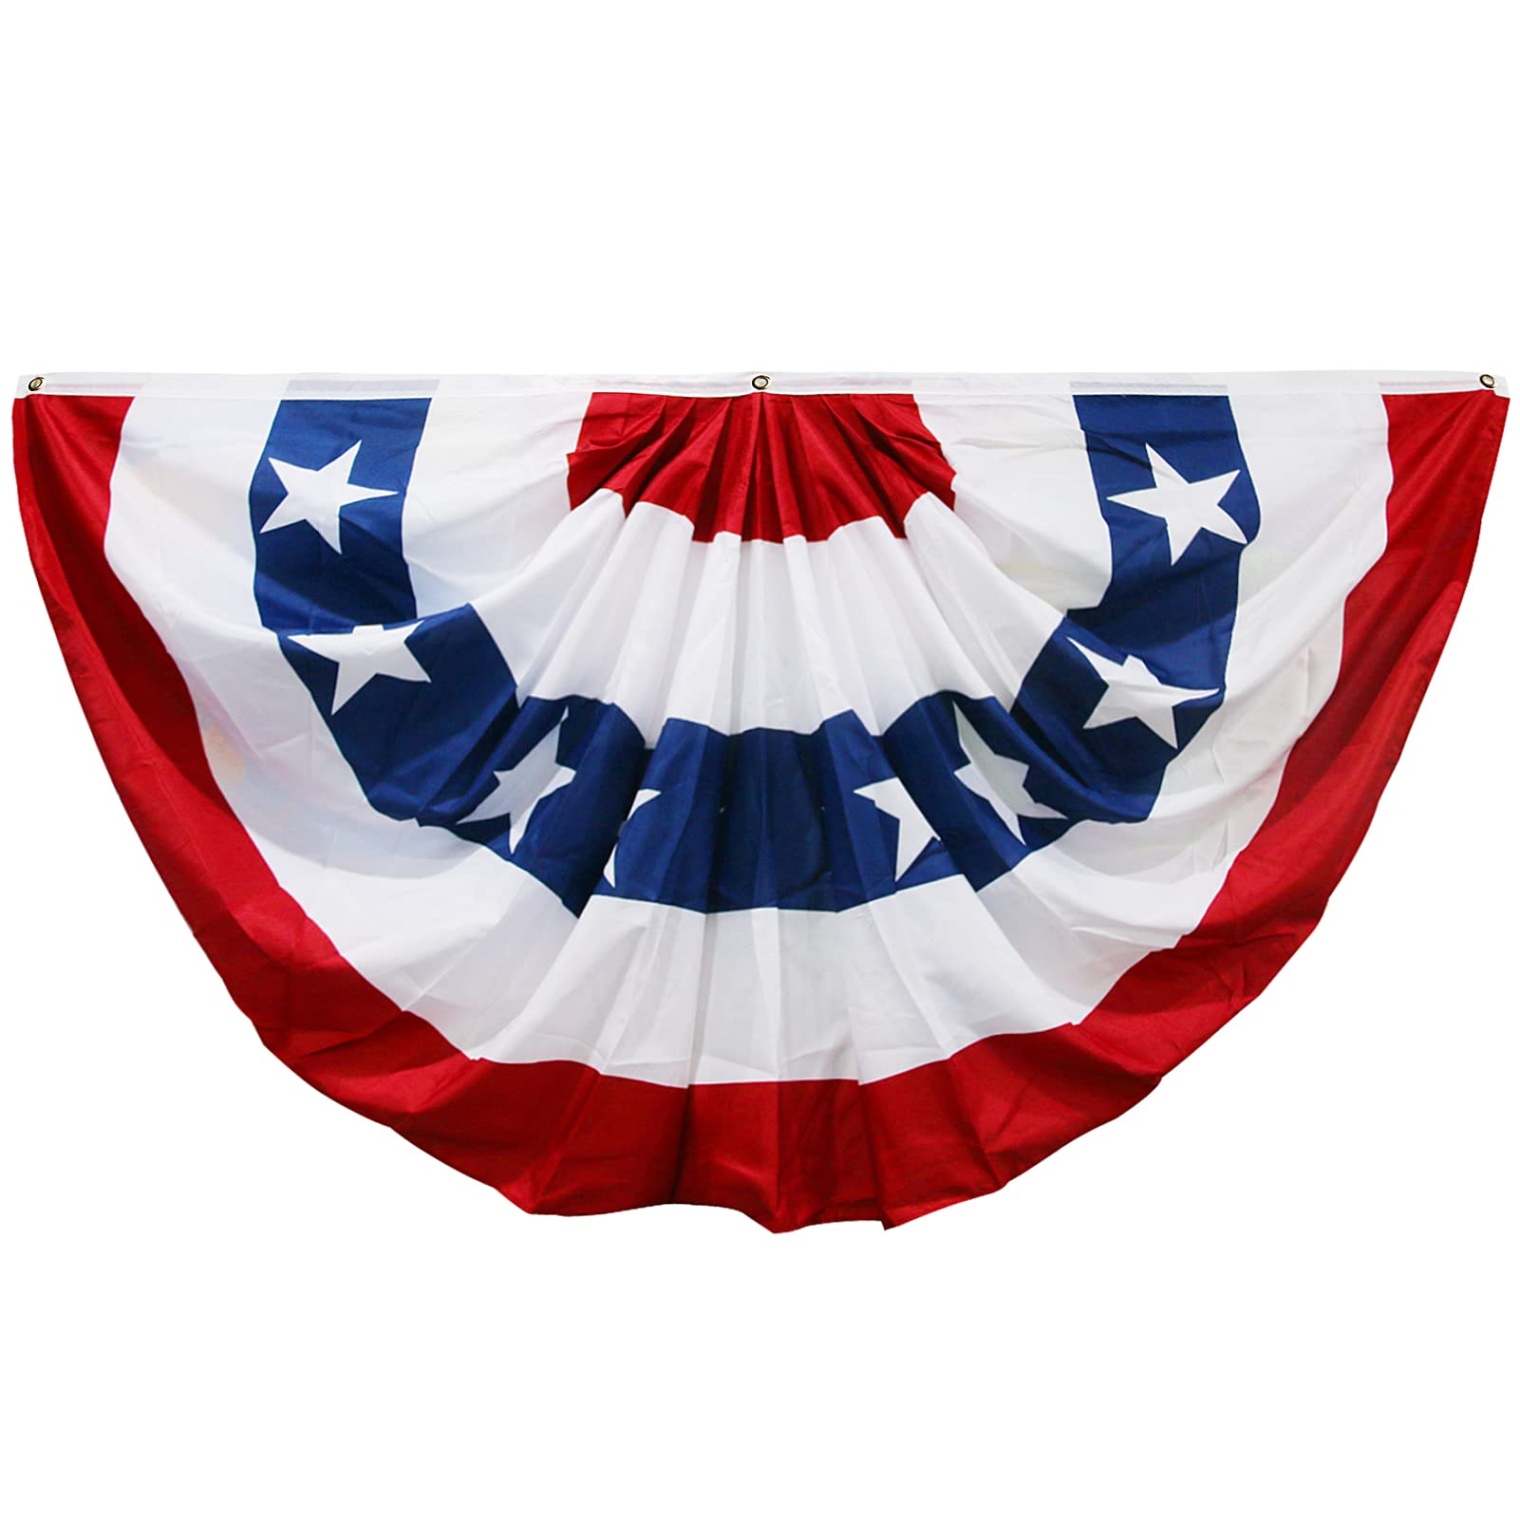 american flag decorations Bulan 2 HOOSUN American Flags Bunting x,th of july decorations outdoor,fourth of  july bunting flag banners,USA Flags Pleated Fan Flag,patriotic bunting for